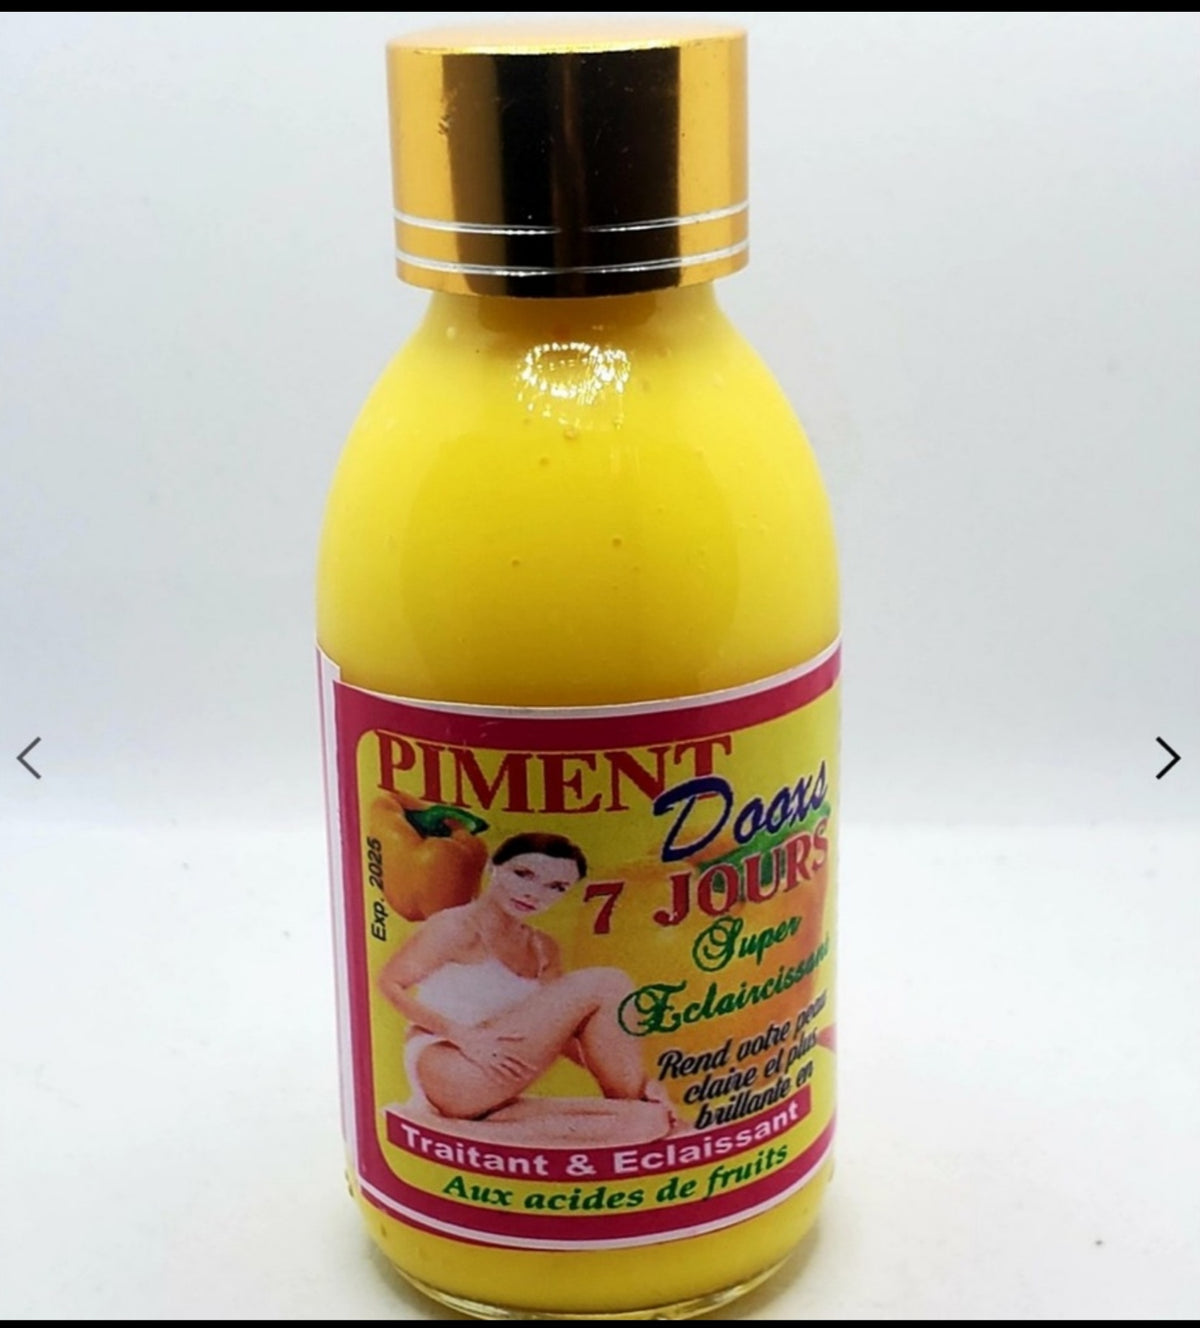  Piment doux concentrated serum : Beauty & Personal Care